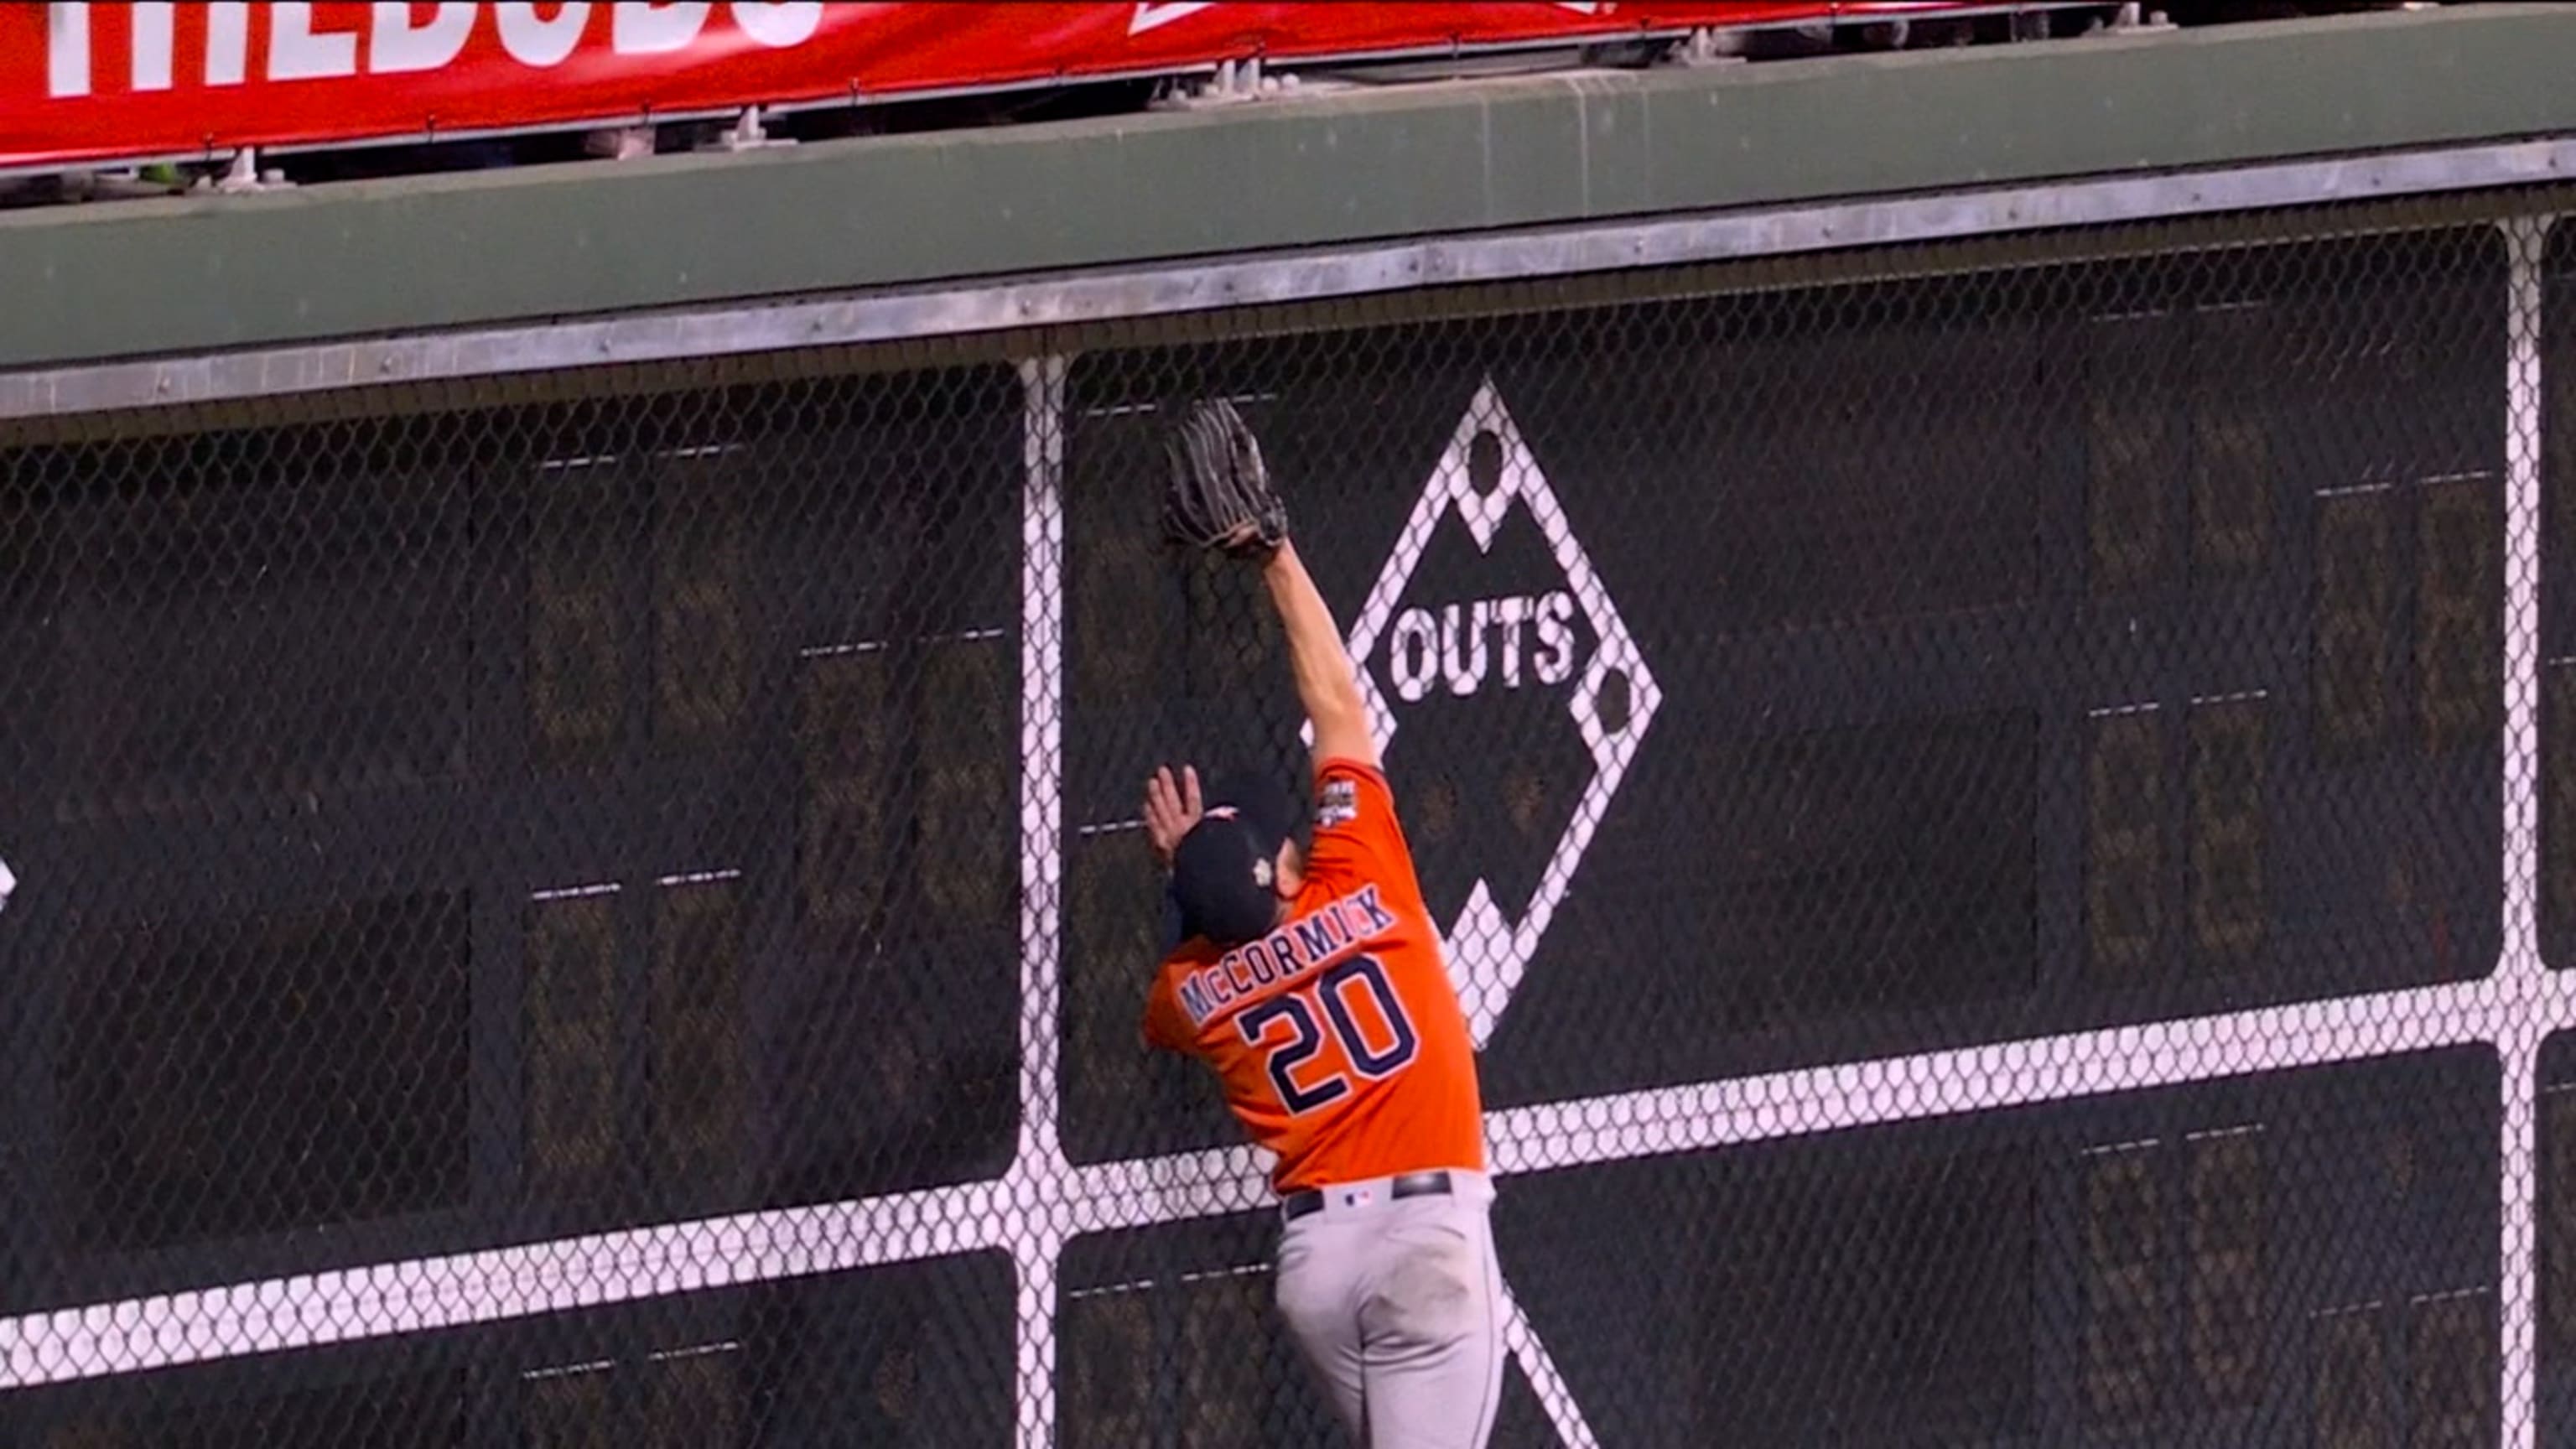 Chas McCormick catch: Watch Astros center fielder rob J.T. Realmuto with  leaping grab in World Series Game 5 